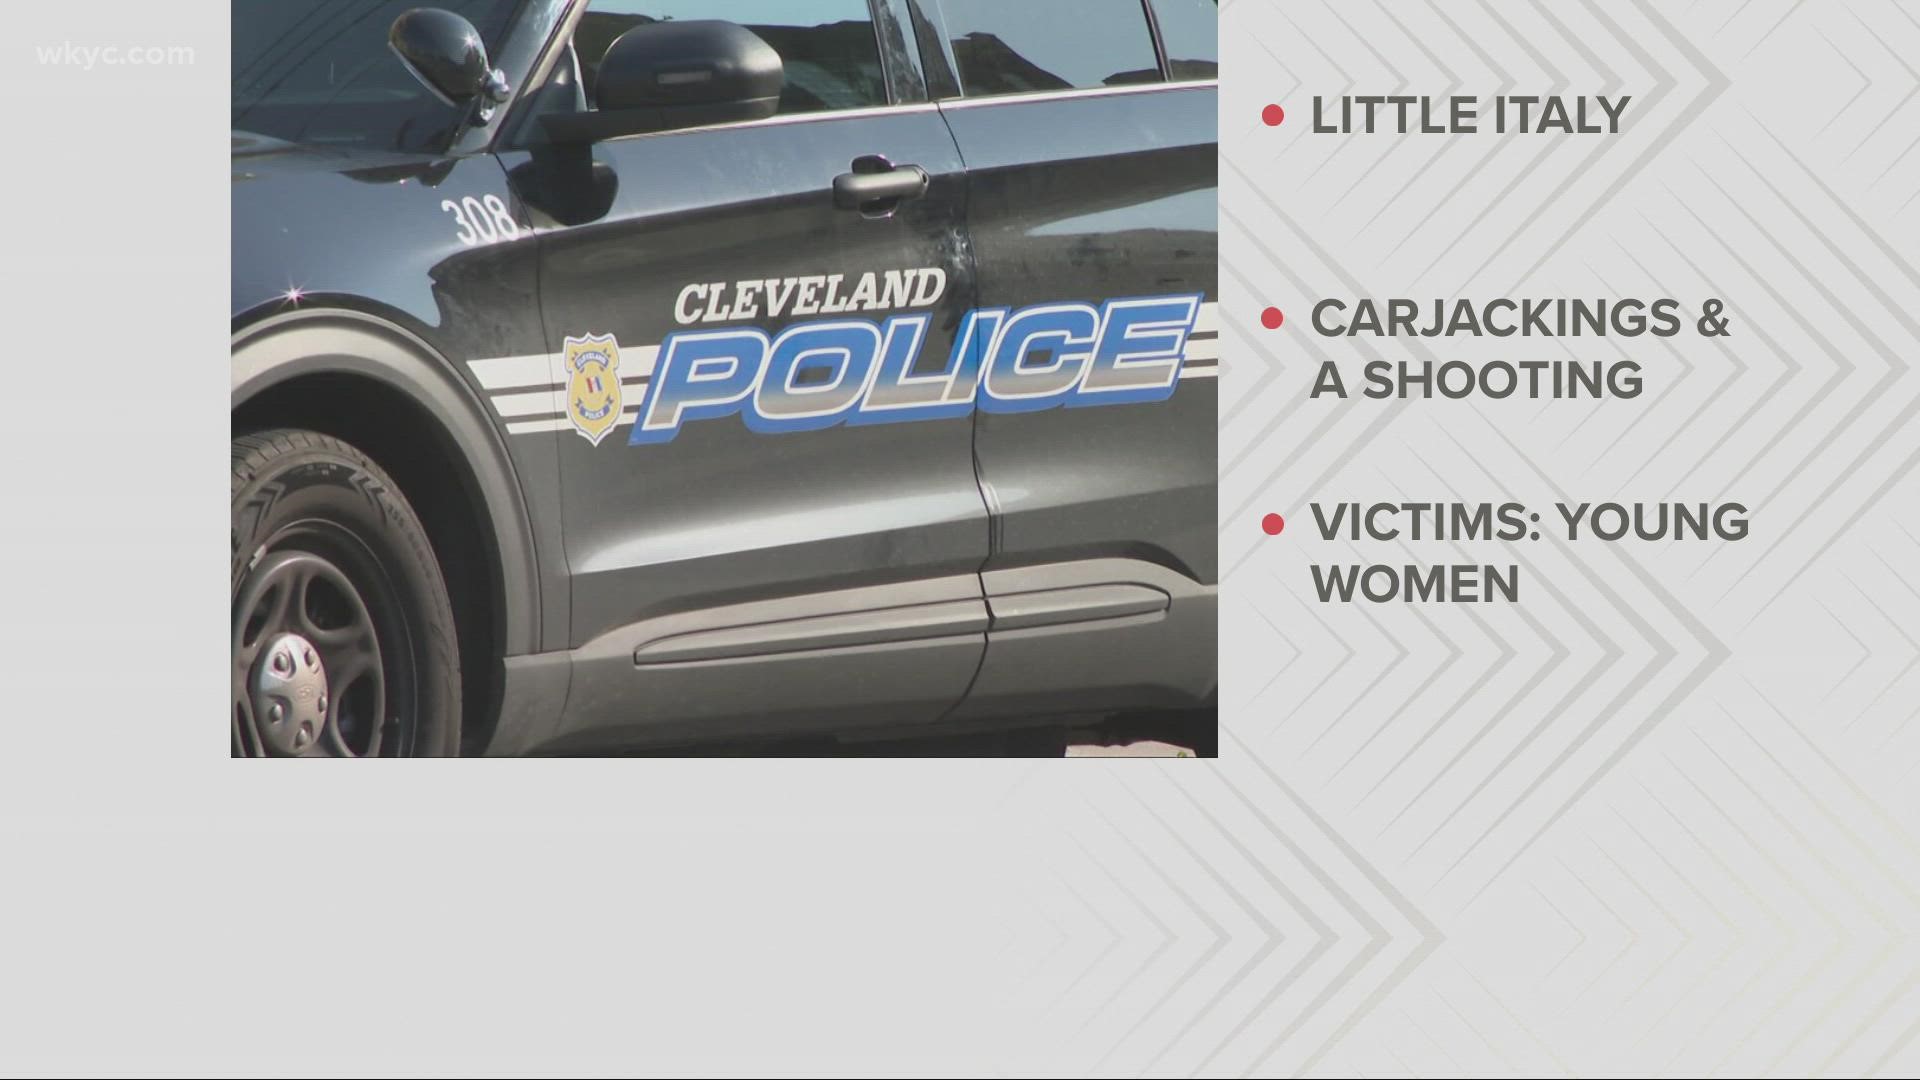 Cleveland Police are investigating multiple crimes that have taken place in Little Italy in the past few weeks.